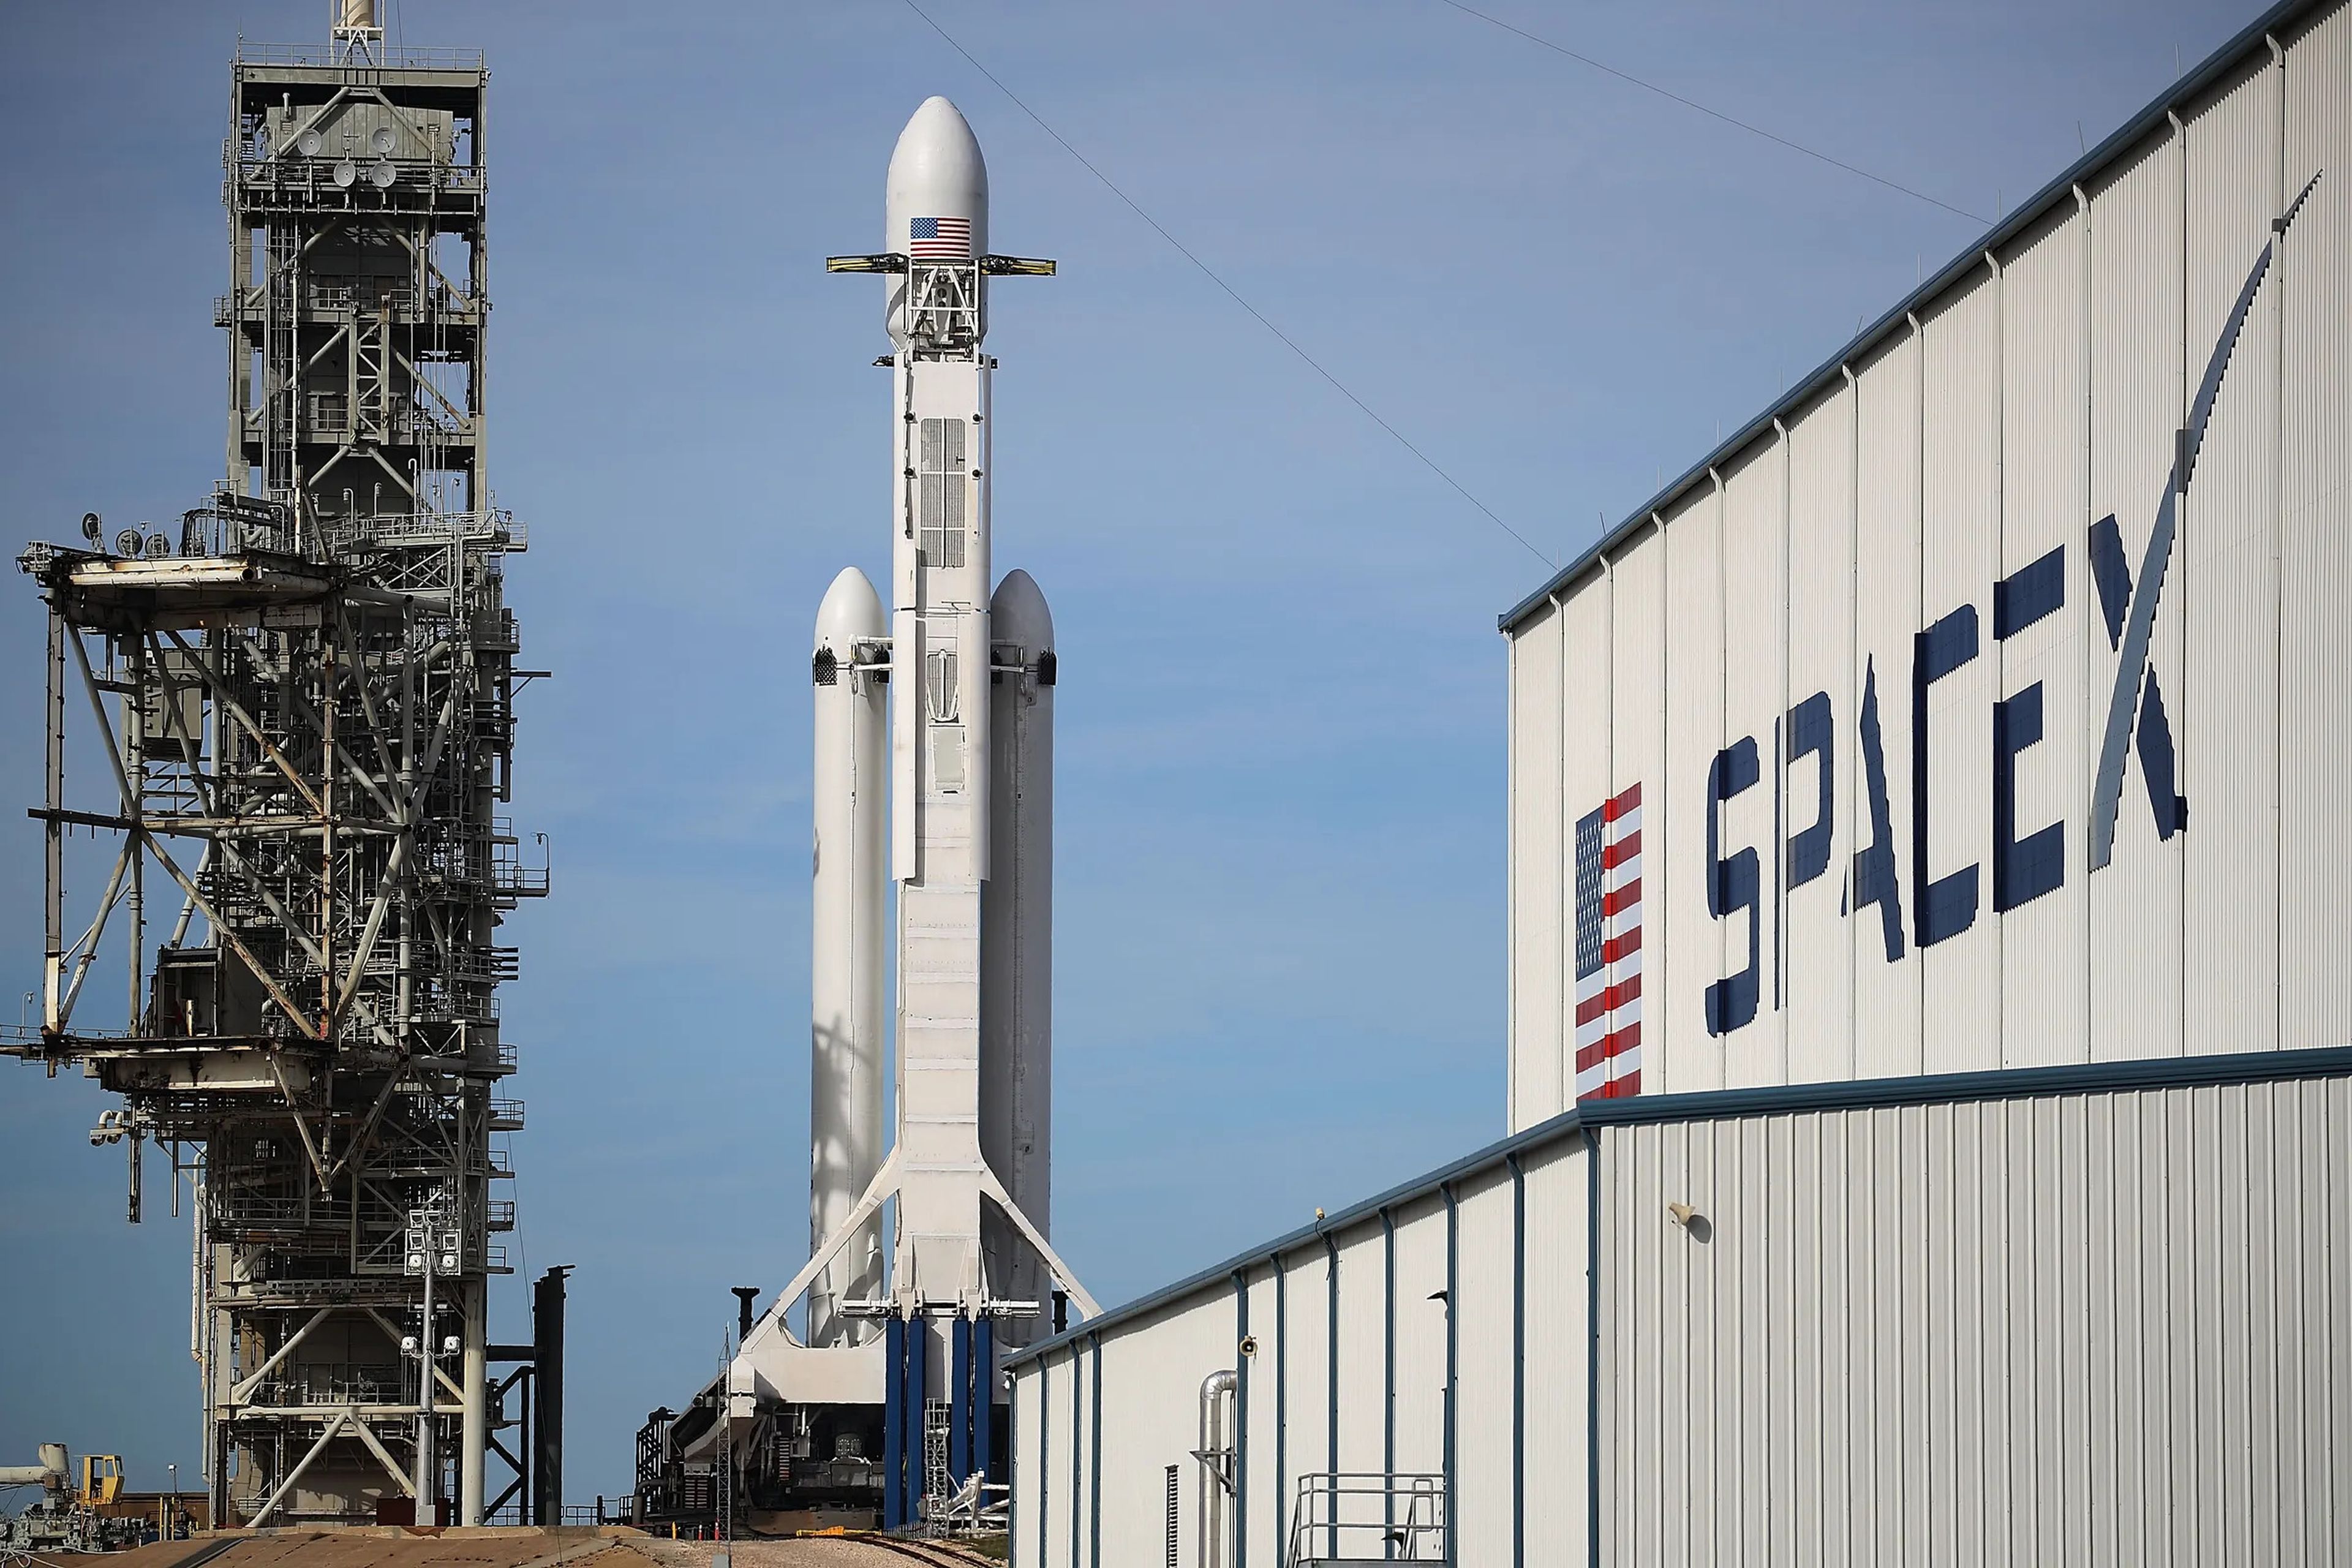 A SpaceX rocket sits on a launchpad in 2018.